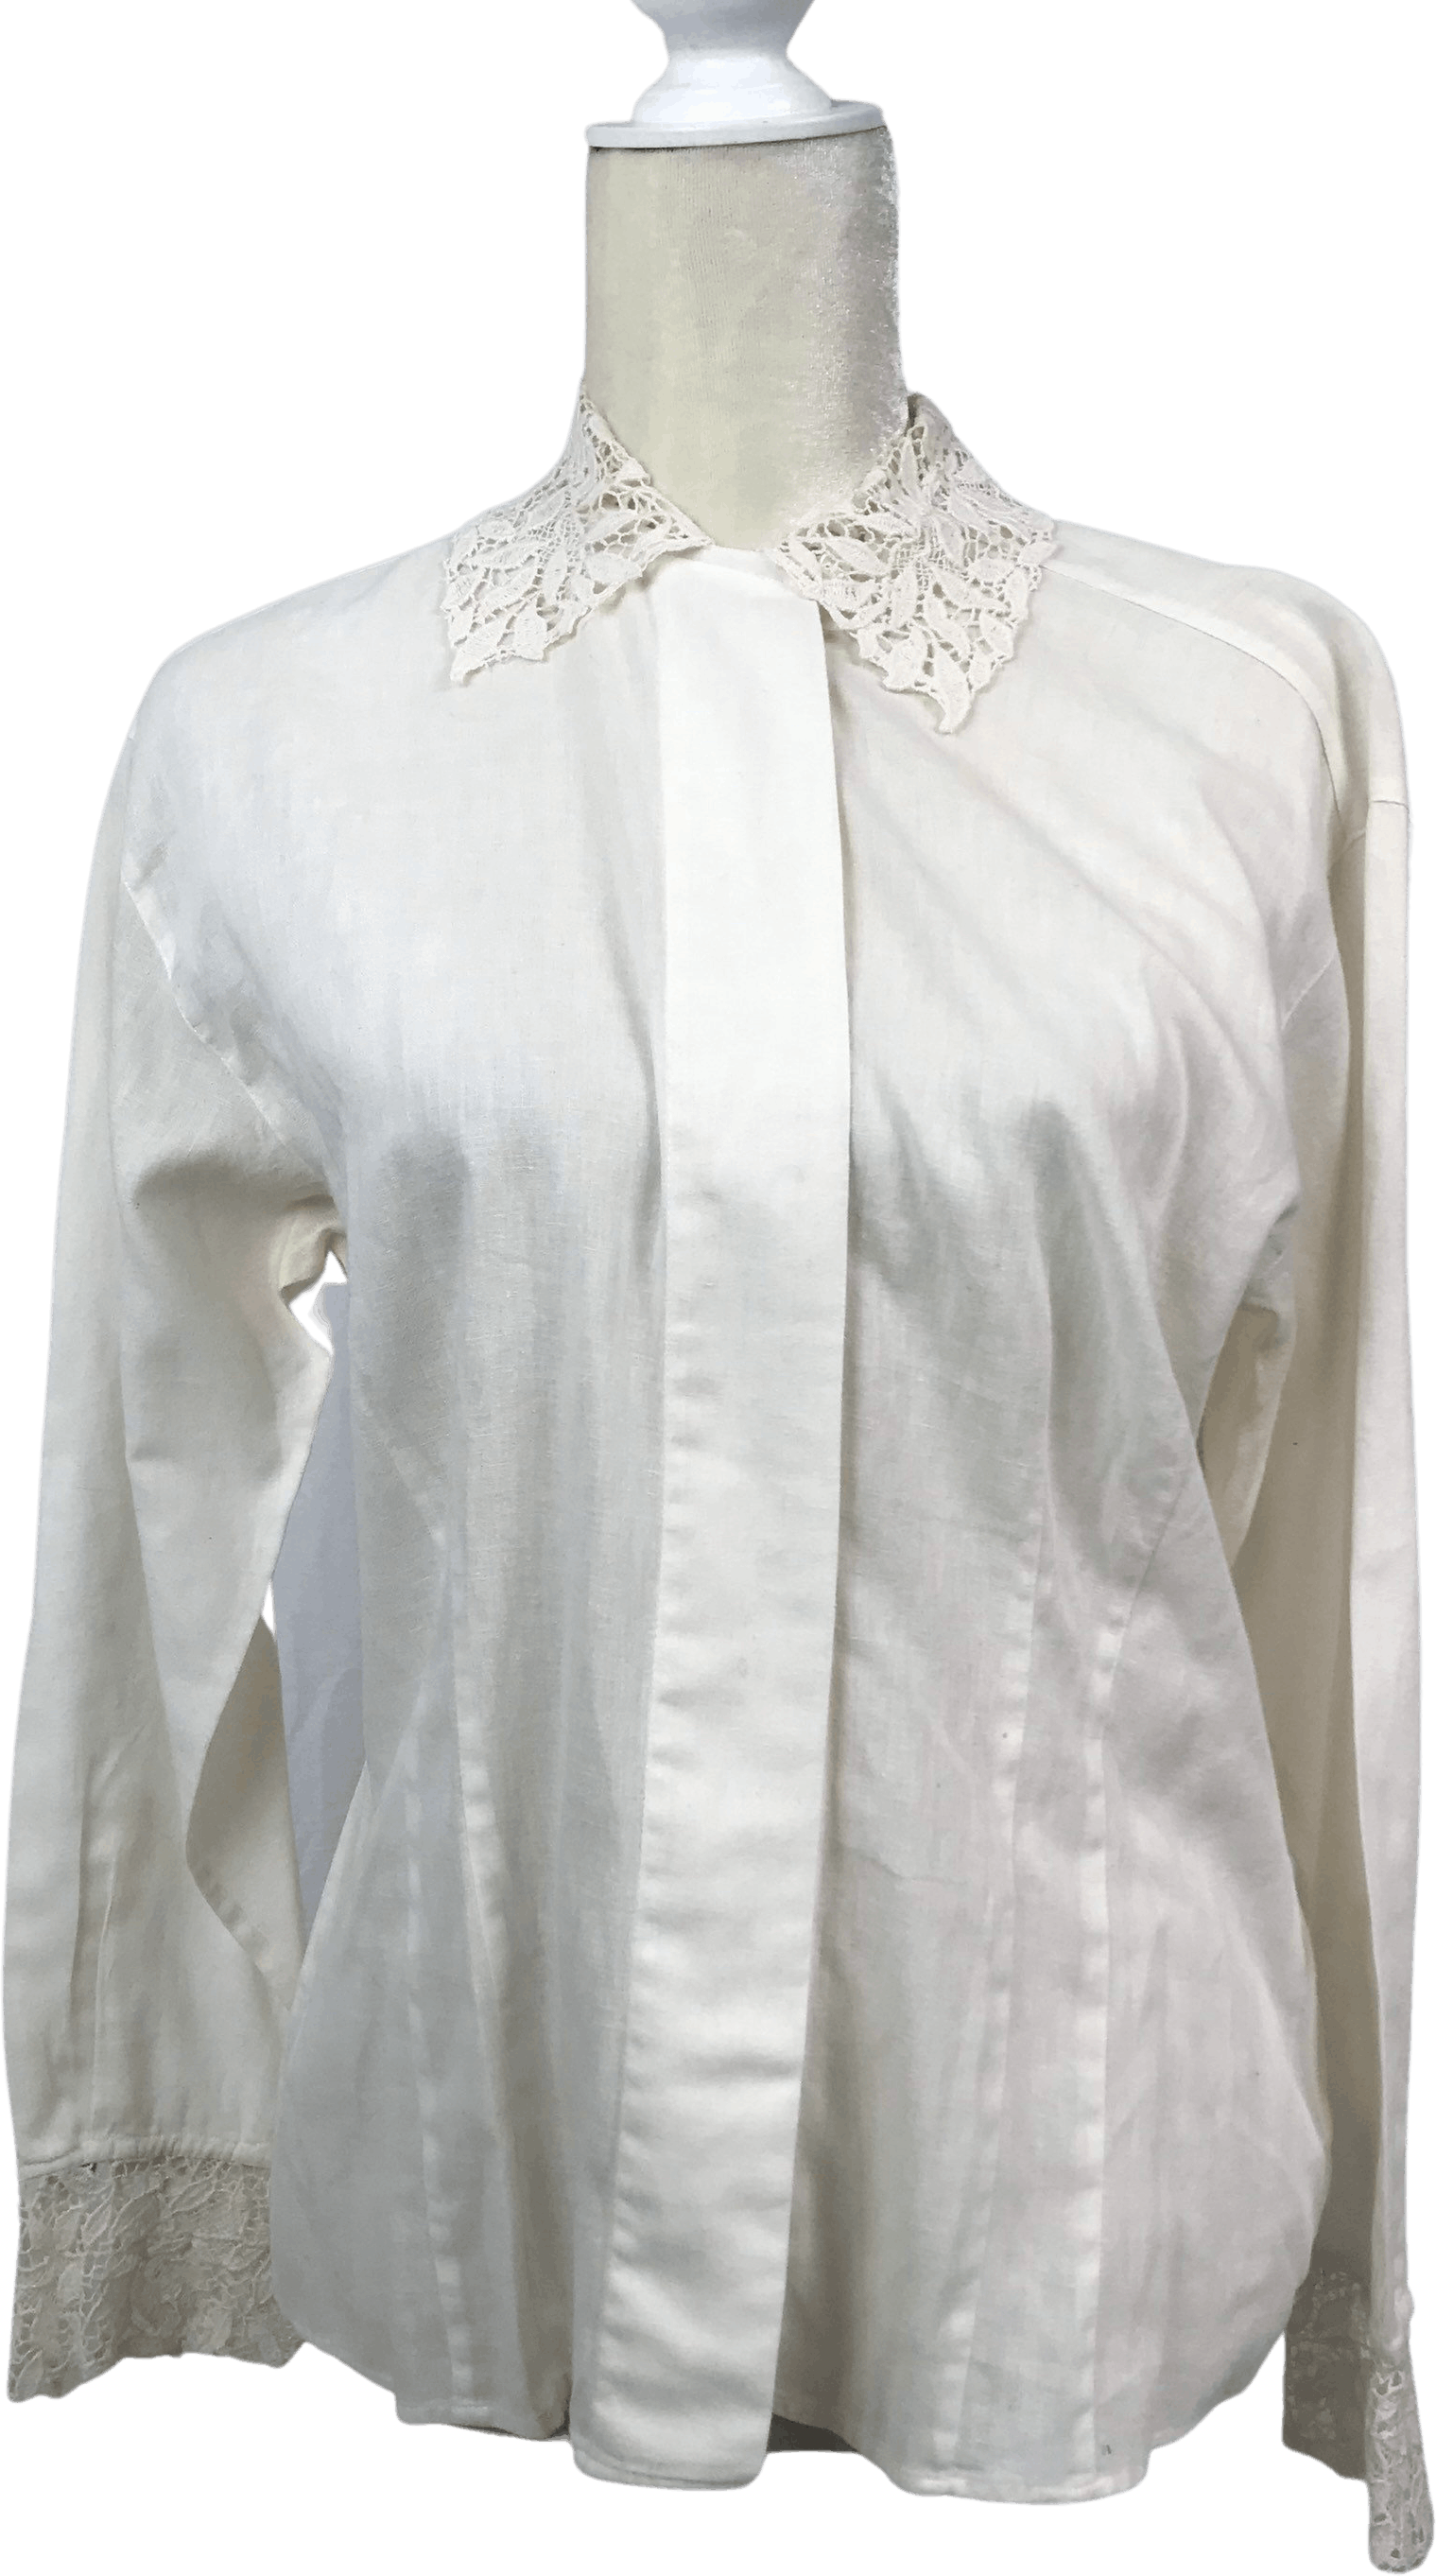 Vintage Ivory and Lace Cotton Blend Shirt | Shop THRILLING